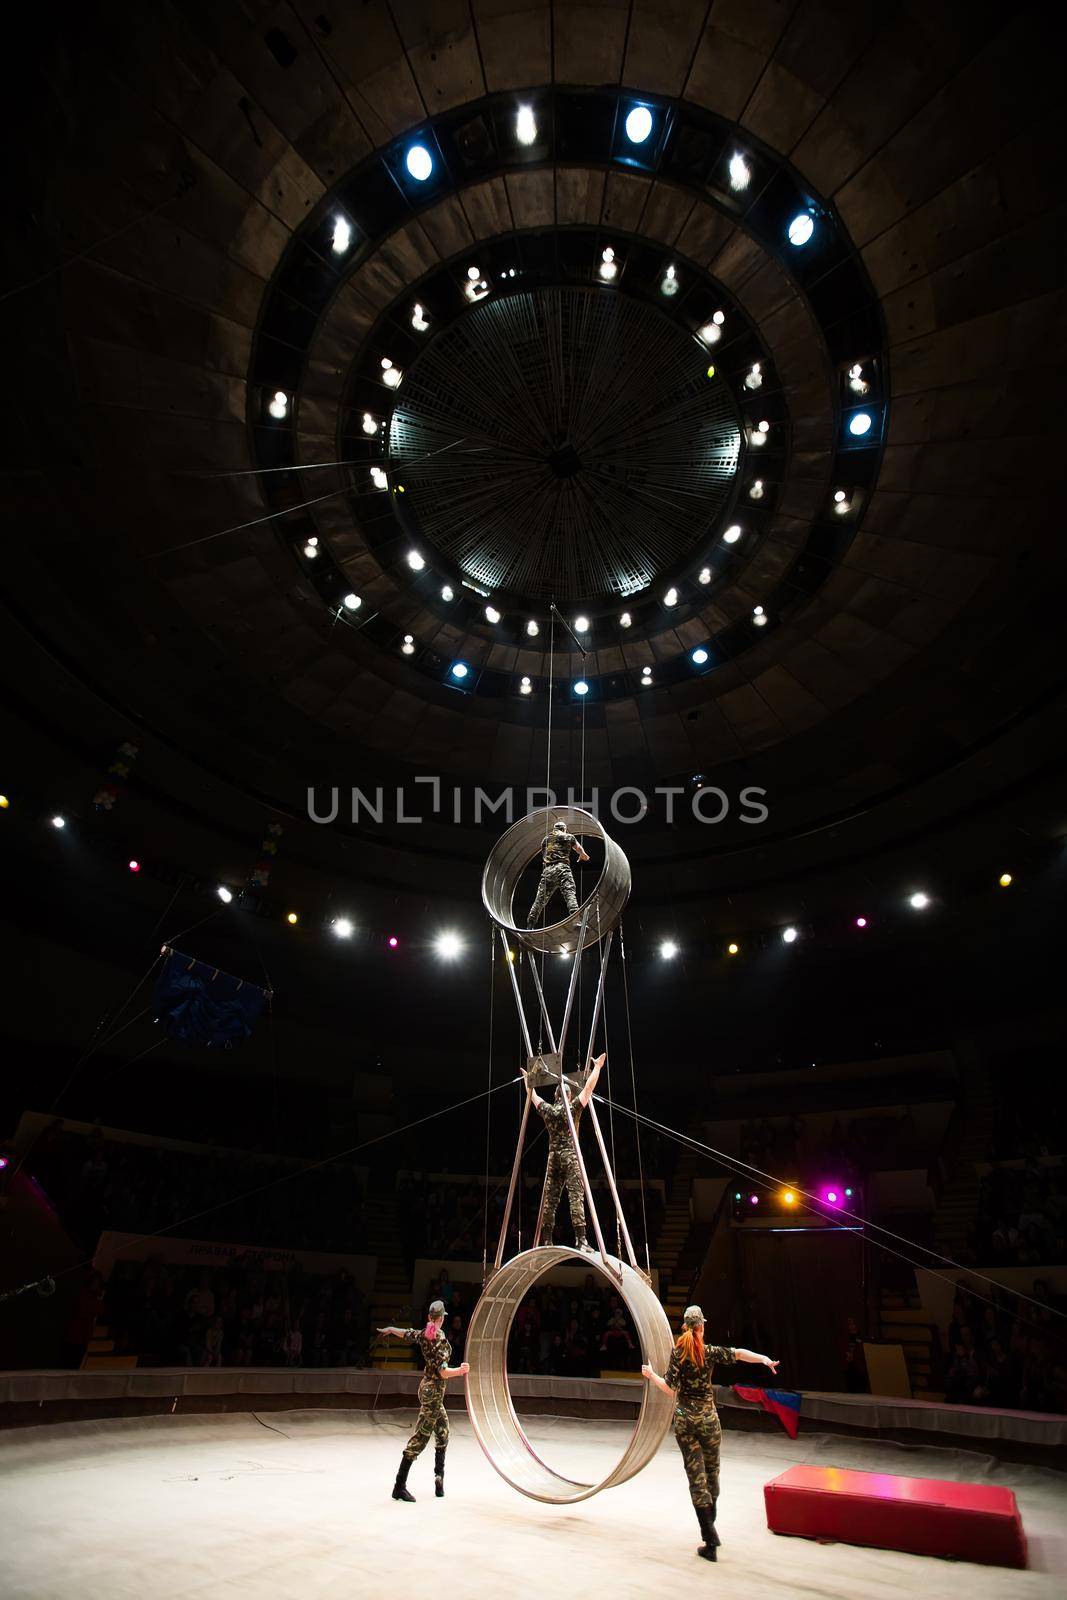 acrobats in the circus perform a complex trick. by StudioPeace